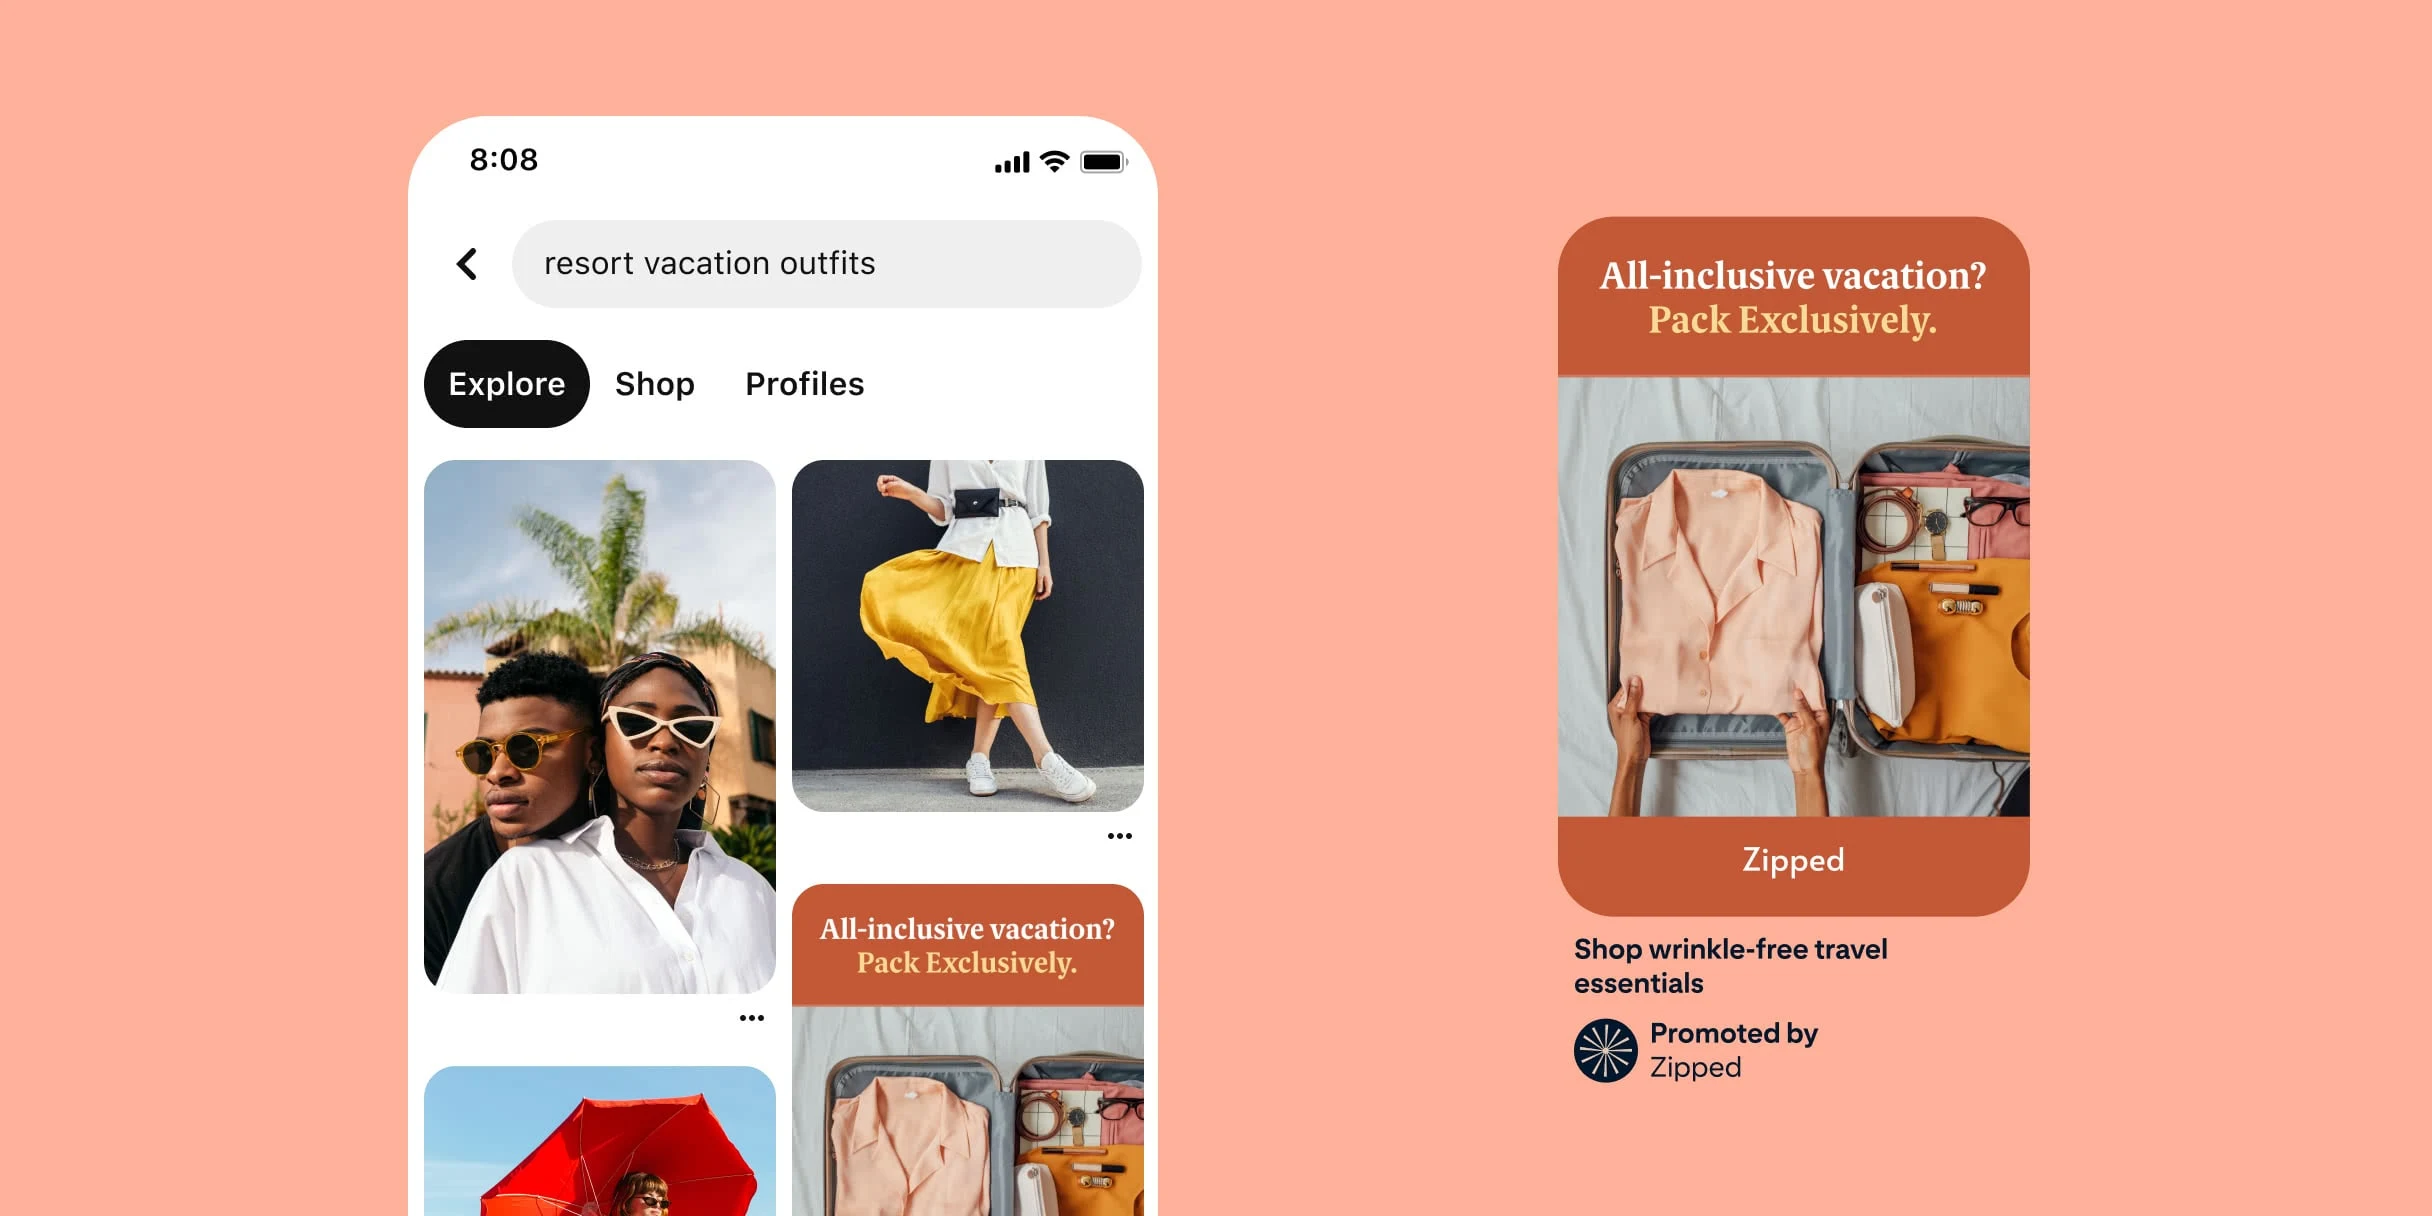 Pinterest search results for resort vacation outfits. Black man in black shirt, Black woman in white shirt in shades. Adobe resort and palm tree in background. White woman in flowing yellow skirt. White woman with red umbrella. Pin of brown hands placing a folded pink blouse into a suitcase, glasses, watch and pen on the other side. Text reads all-inclusive vacation? Pack exclusively. Description reads shop wrinkle-free travel essentials.